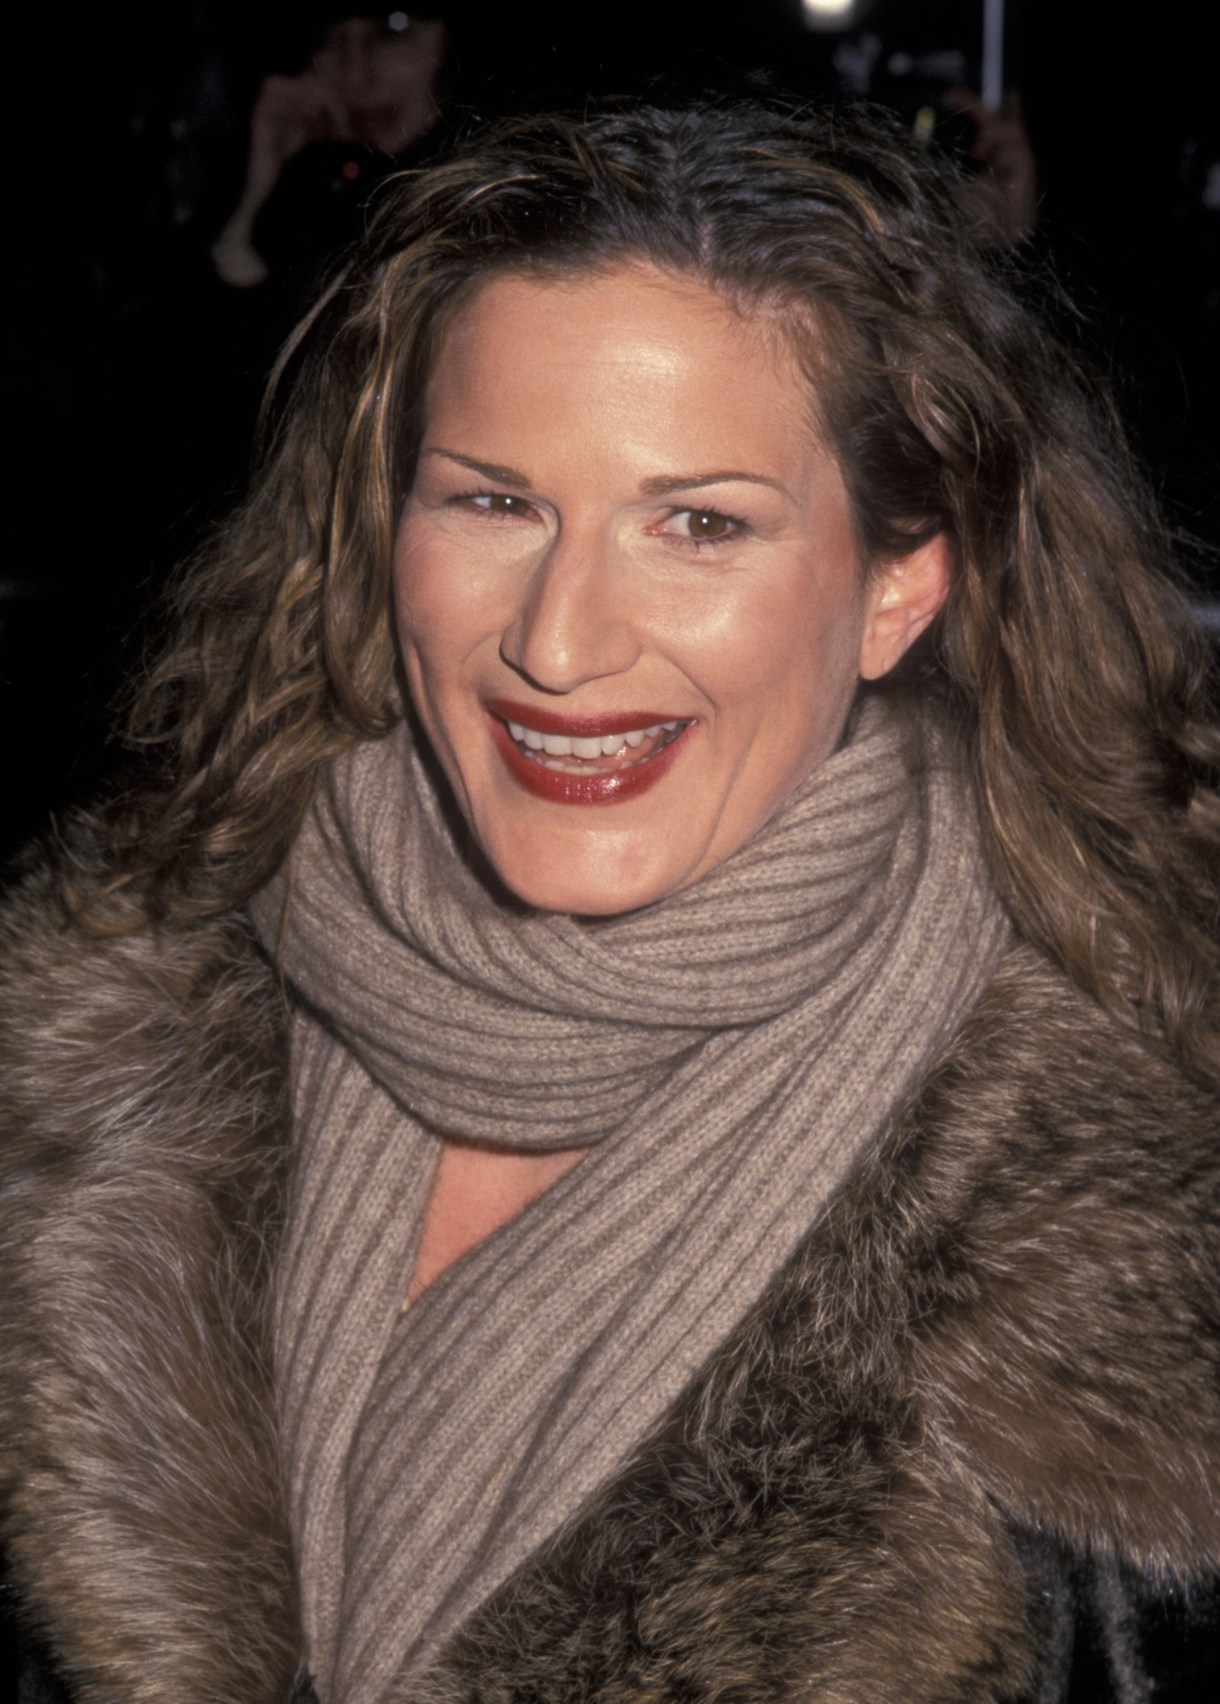 NEW YORK CITY - FEBRUARY 28:  Ana Gasteyer attends the screening of "Blow Dry" on February 28, 2001 at the Paris Theater in New York City. 